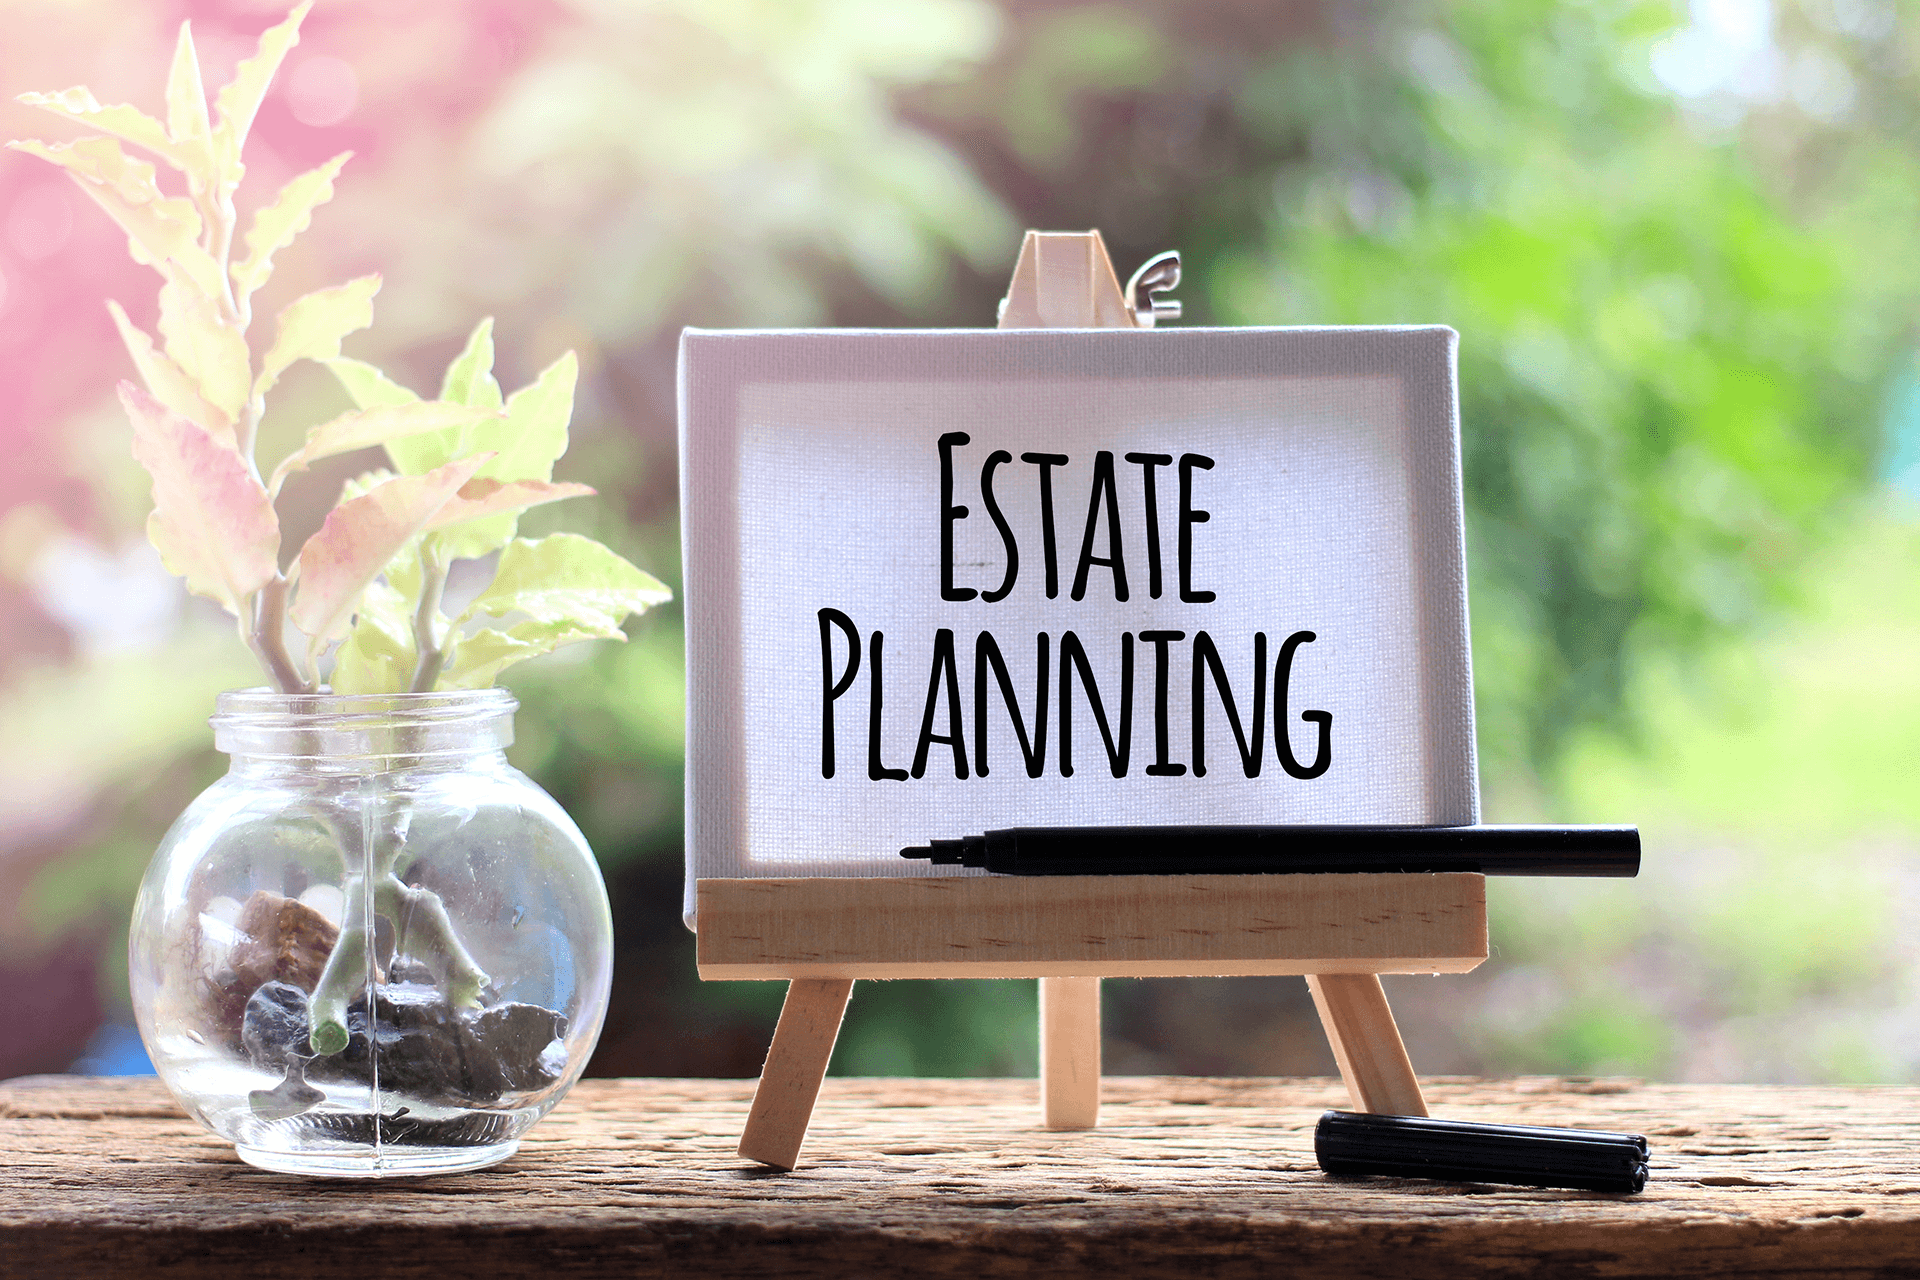 Local Estate Planners